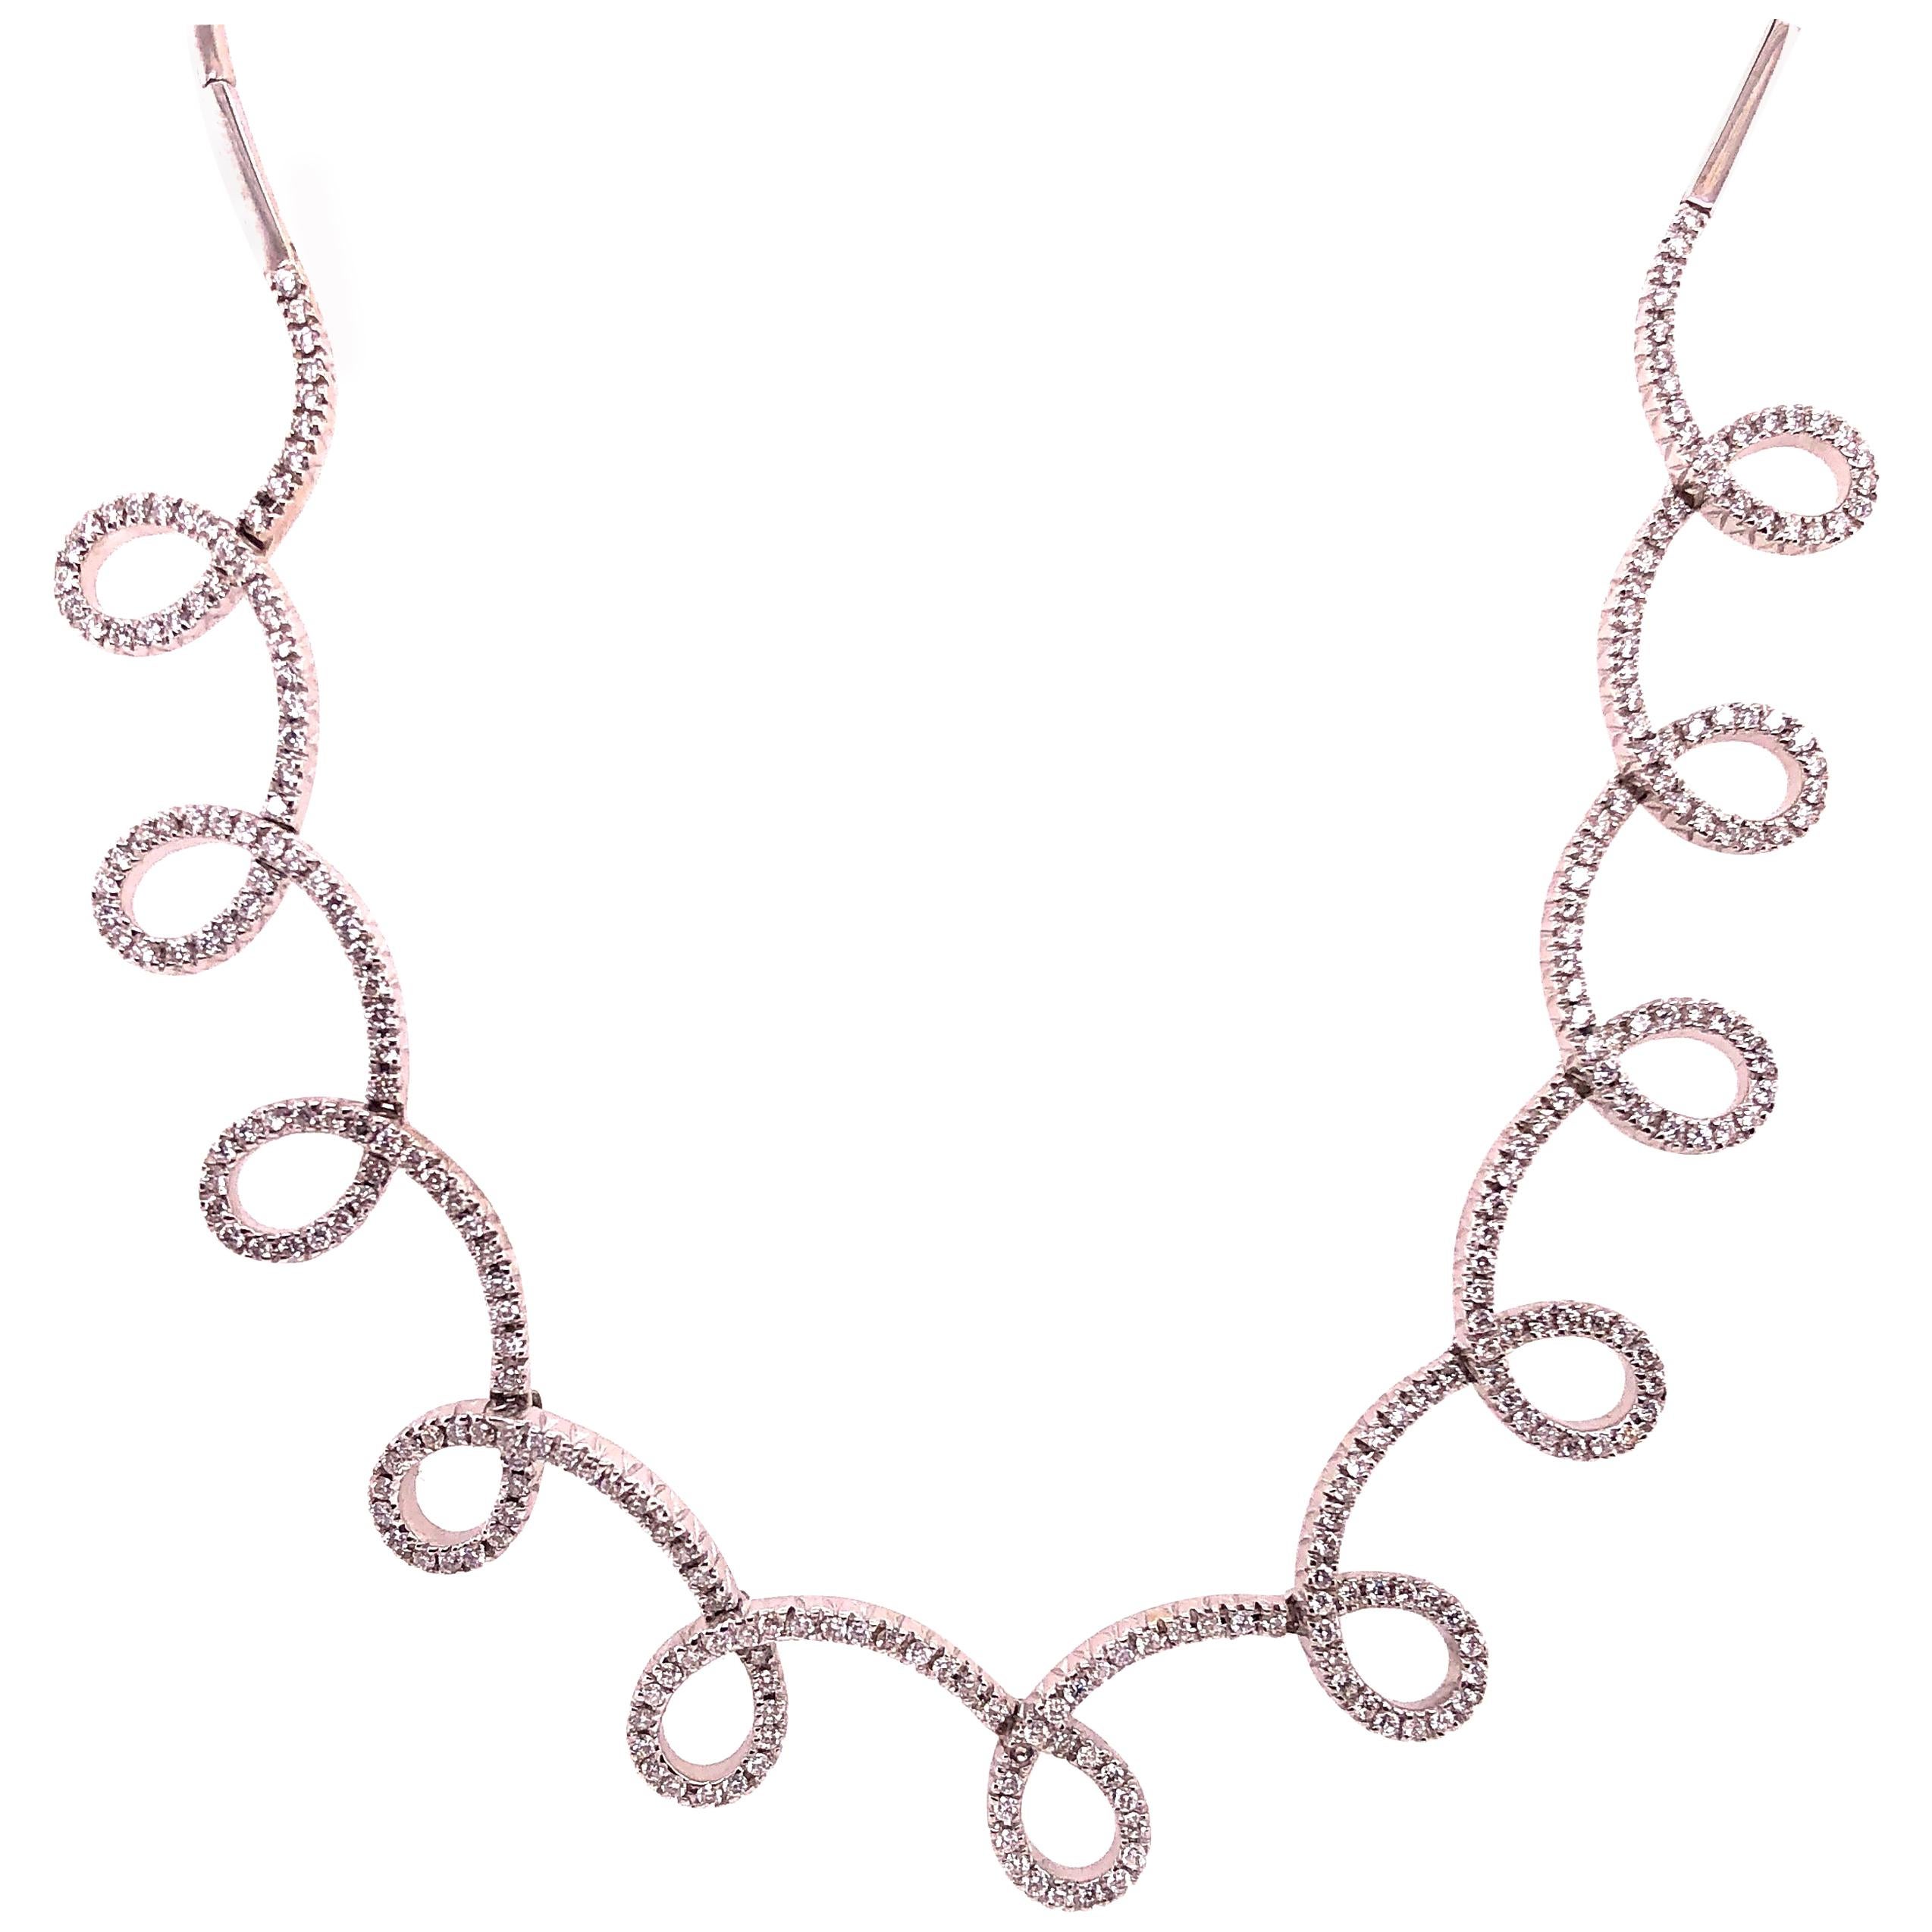 18 Karat White Gold and Diamond Swirl Necklace by H2 at Hammerman For Sale